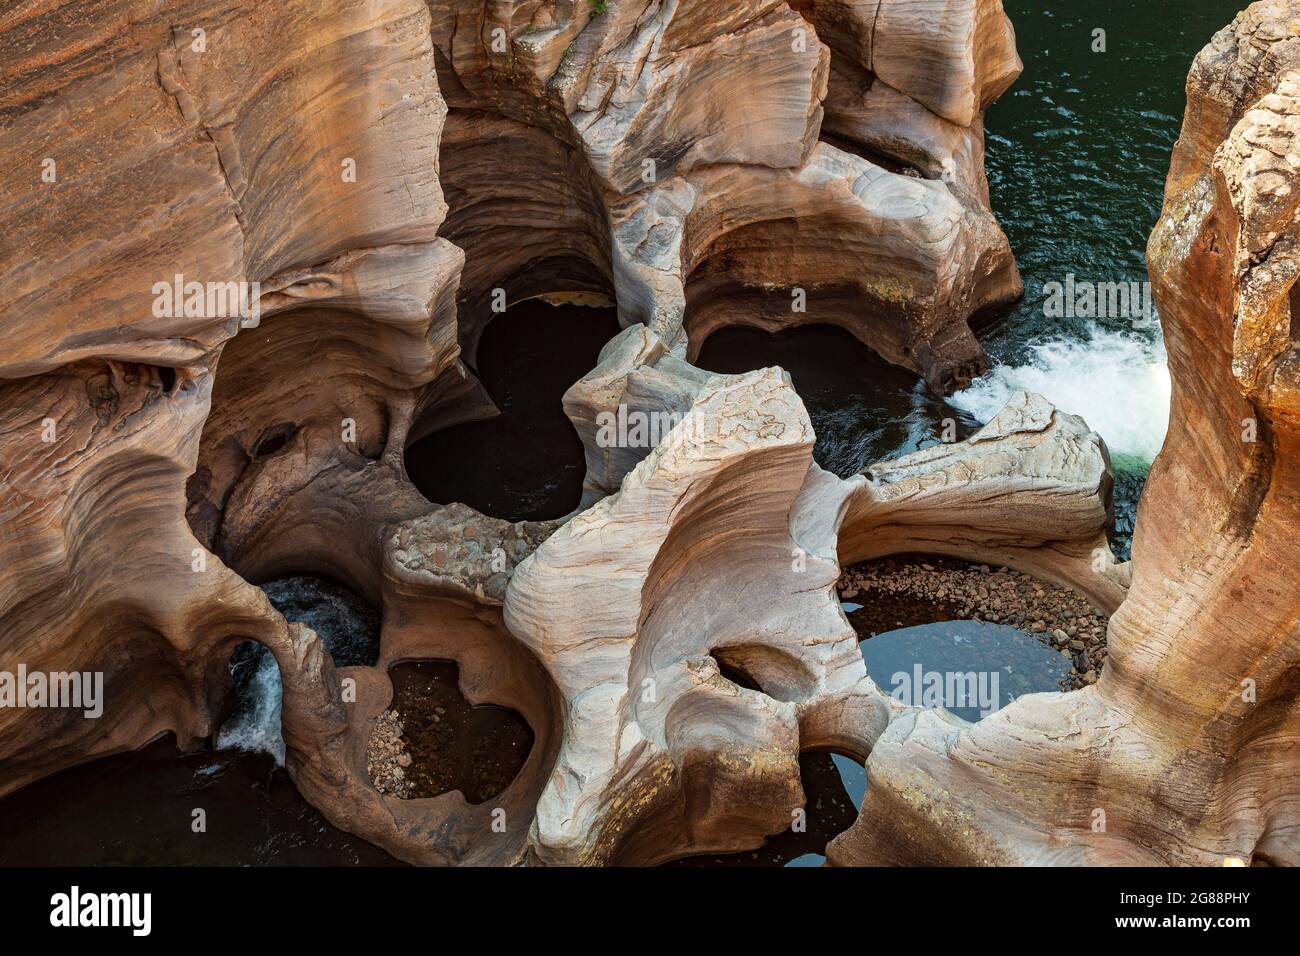 Bourke's Luck Potholes, eroded sandstone formations at Blyde River Canyon, Mpumalanga, South Africa Stock Photo